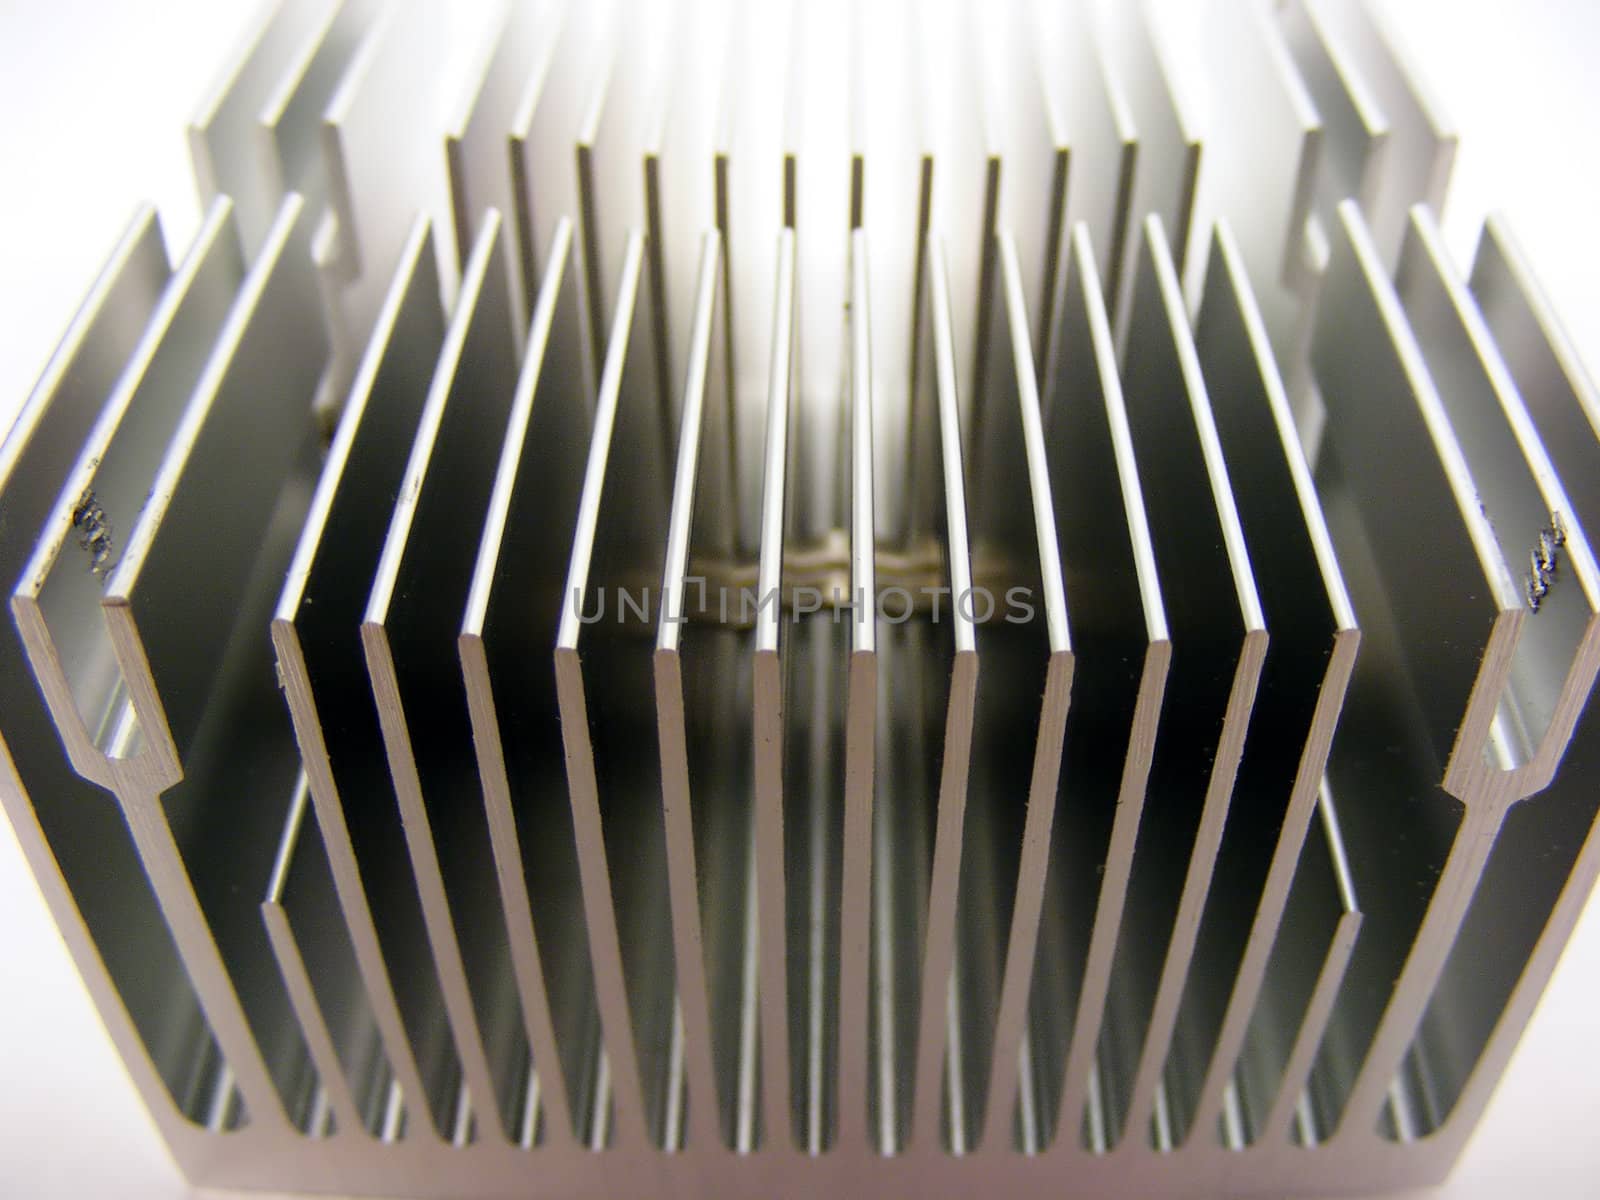 A computer heatsink for a processor on a white background.